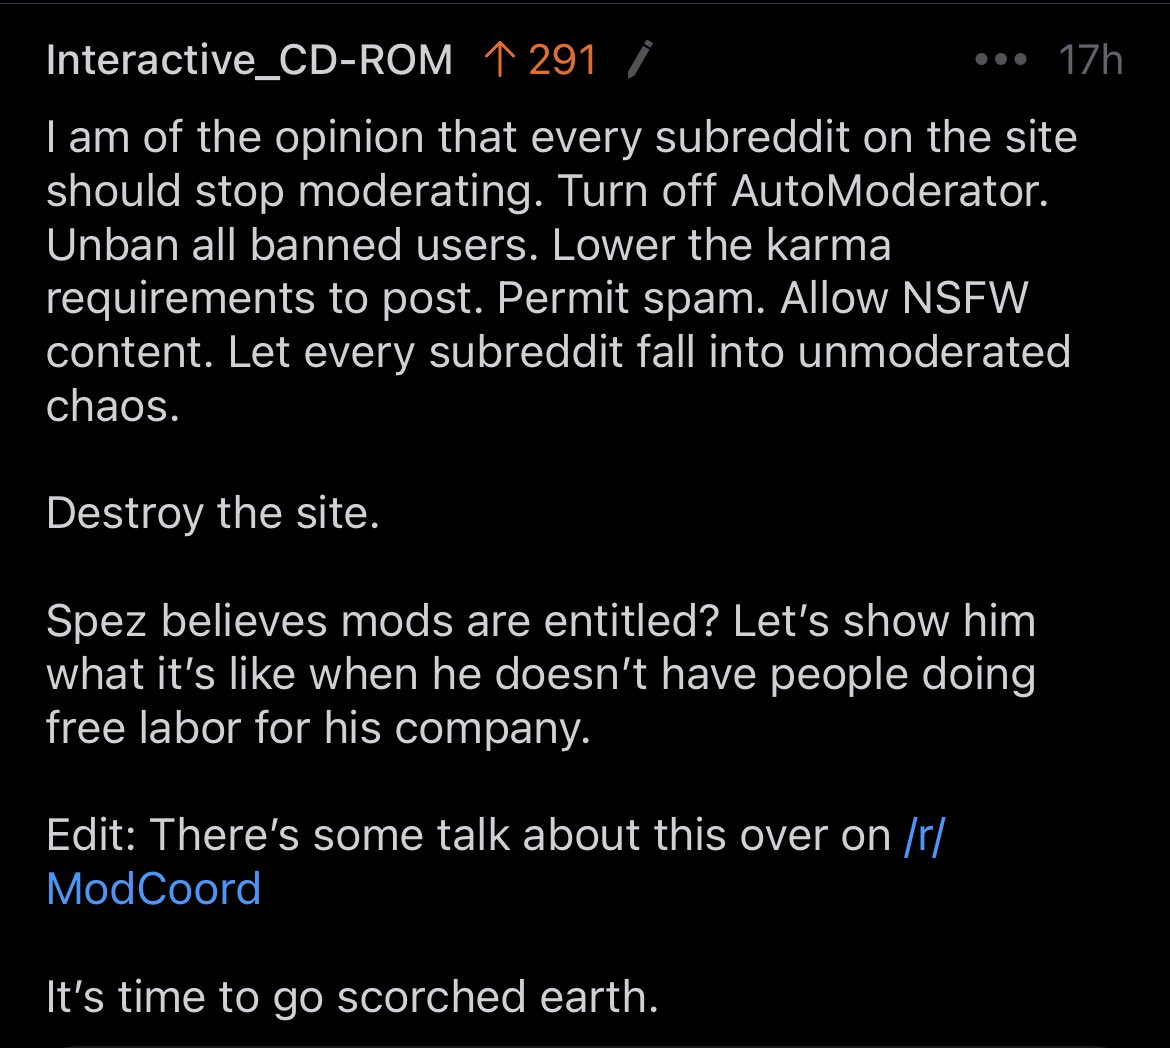 THIS is how Redditors should boycott Reddit without blocking valuable information. The IPO will never be made if Reddit turns to 4chan. #RedditBlackout